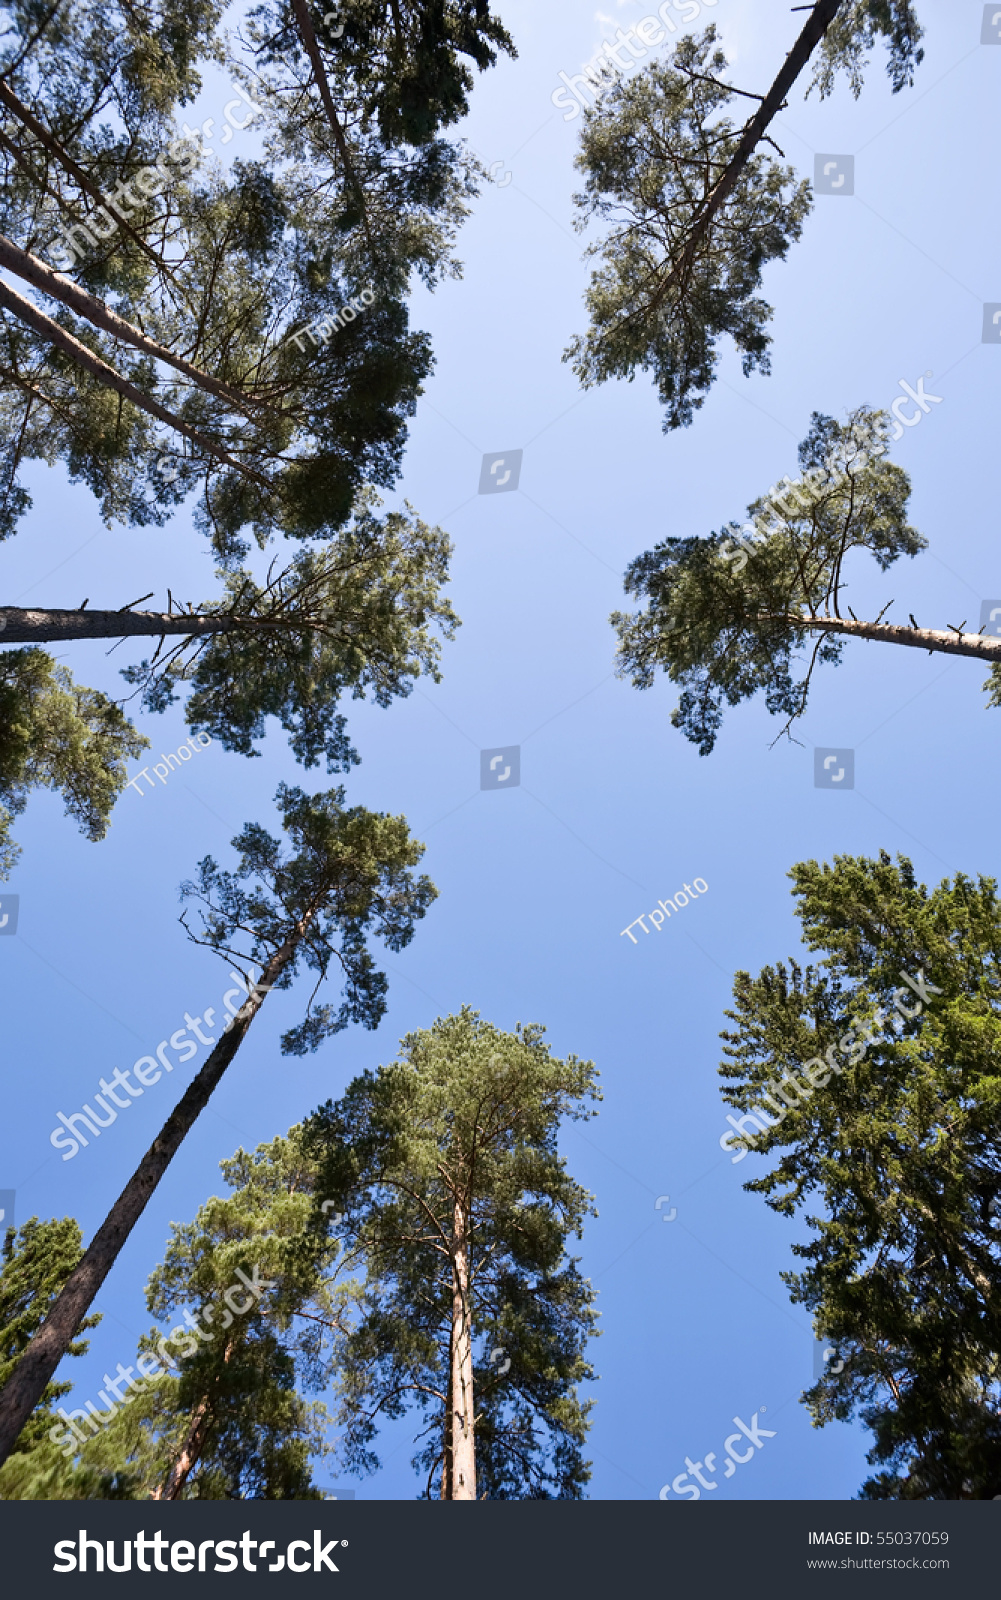 Pine trees from below against a blue sky #55037059